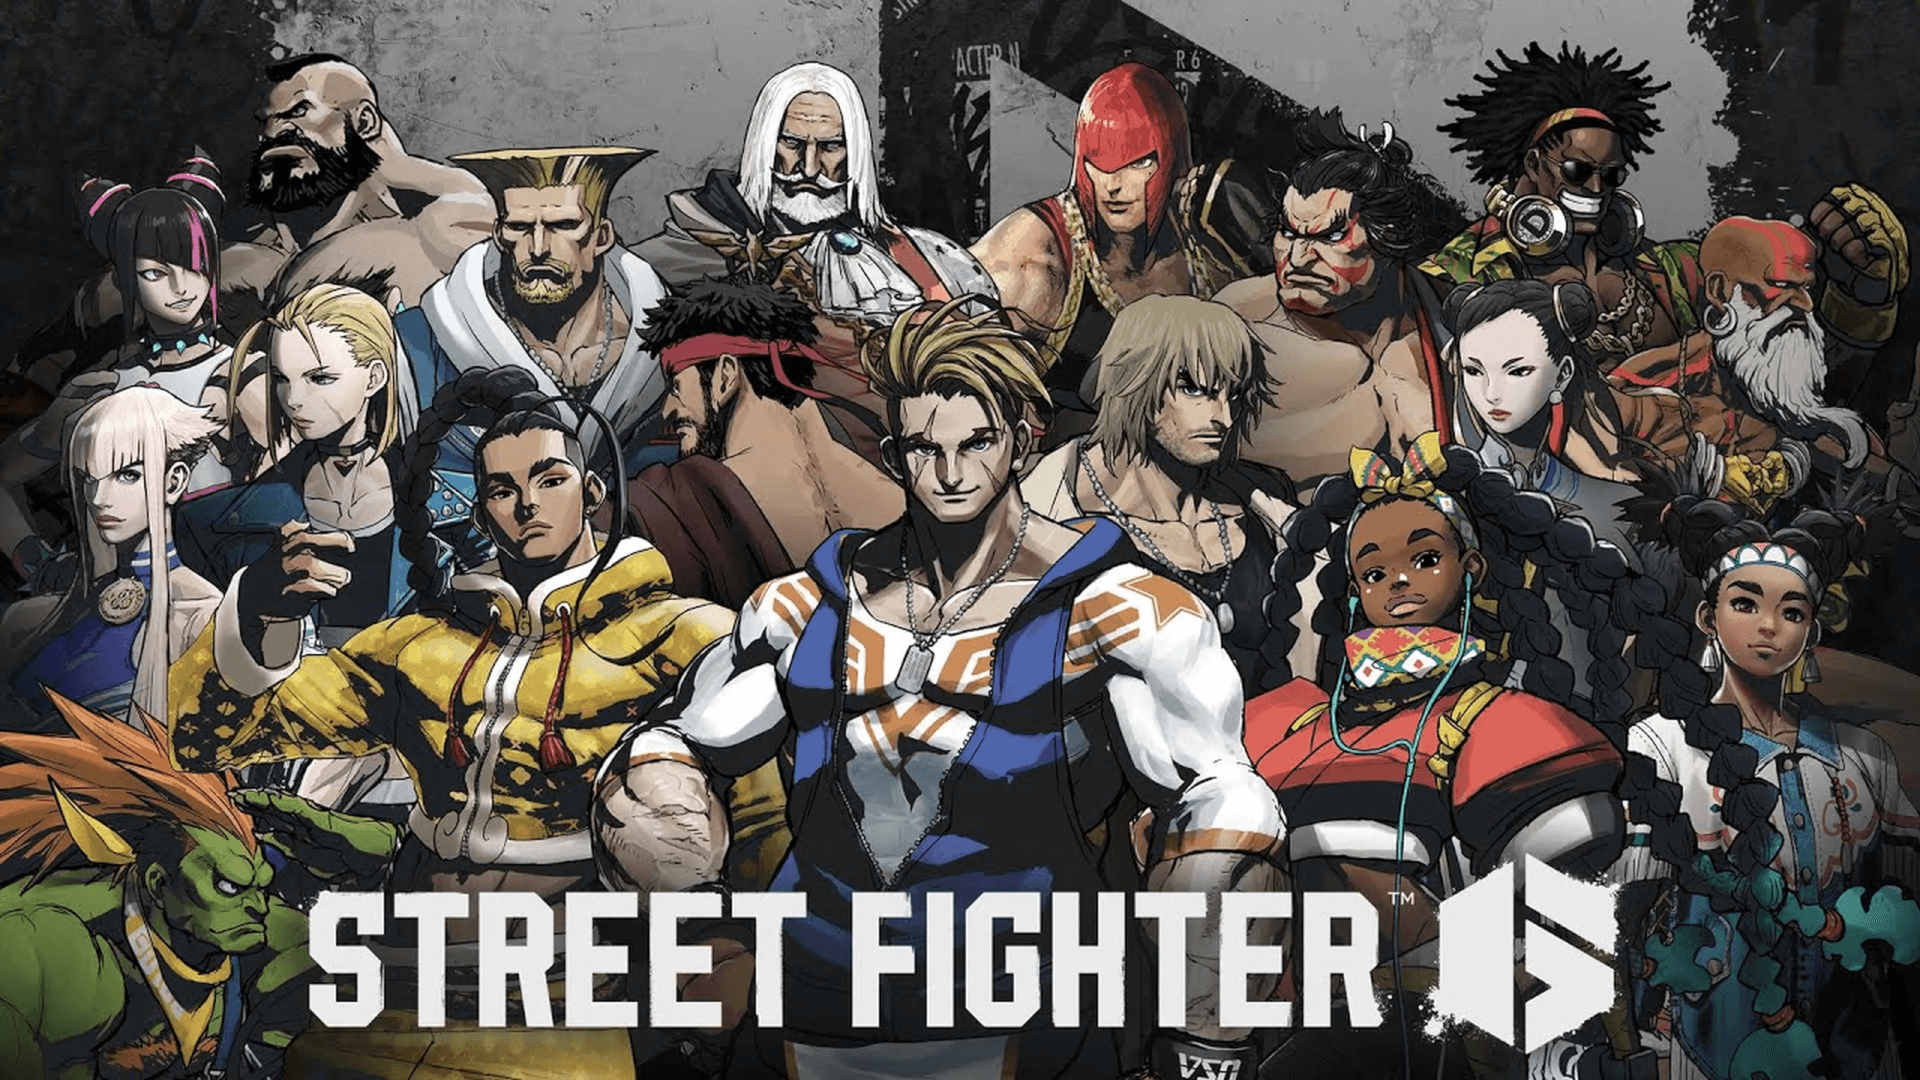 Street Fighter Now Features "Master League" With a 3-Month-Long Season